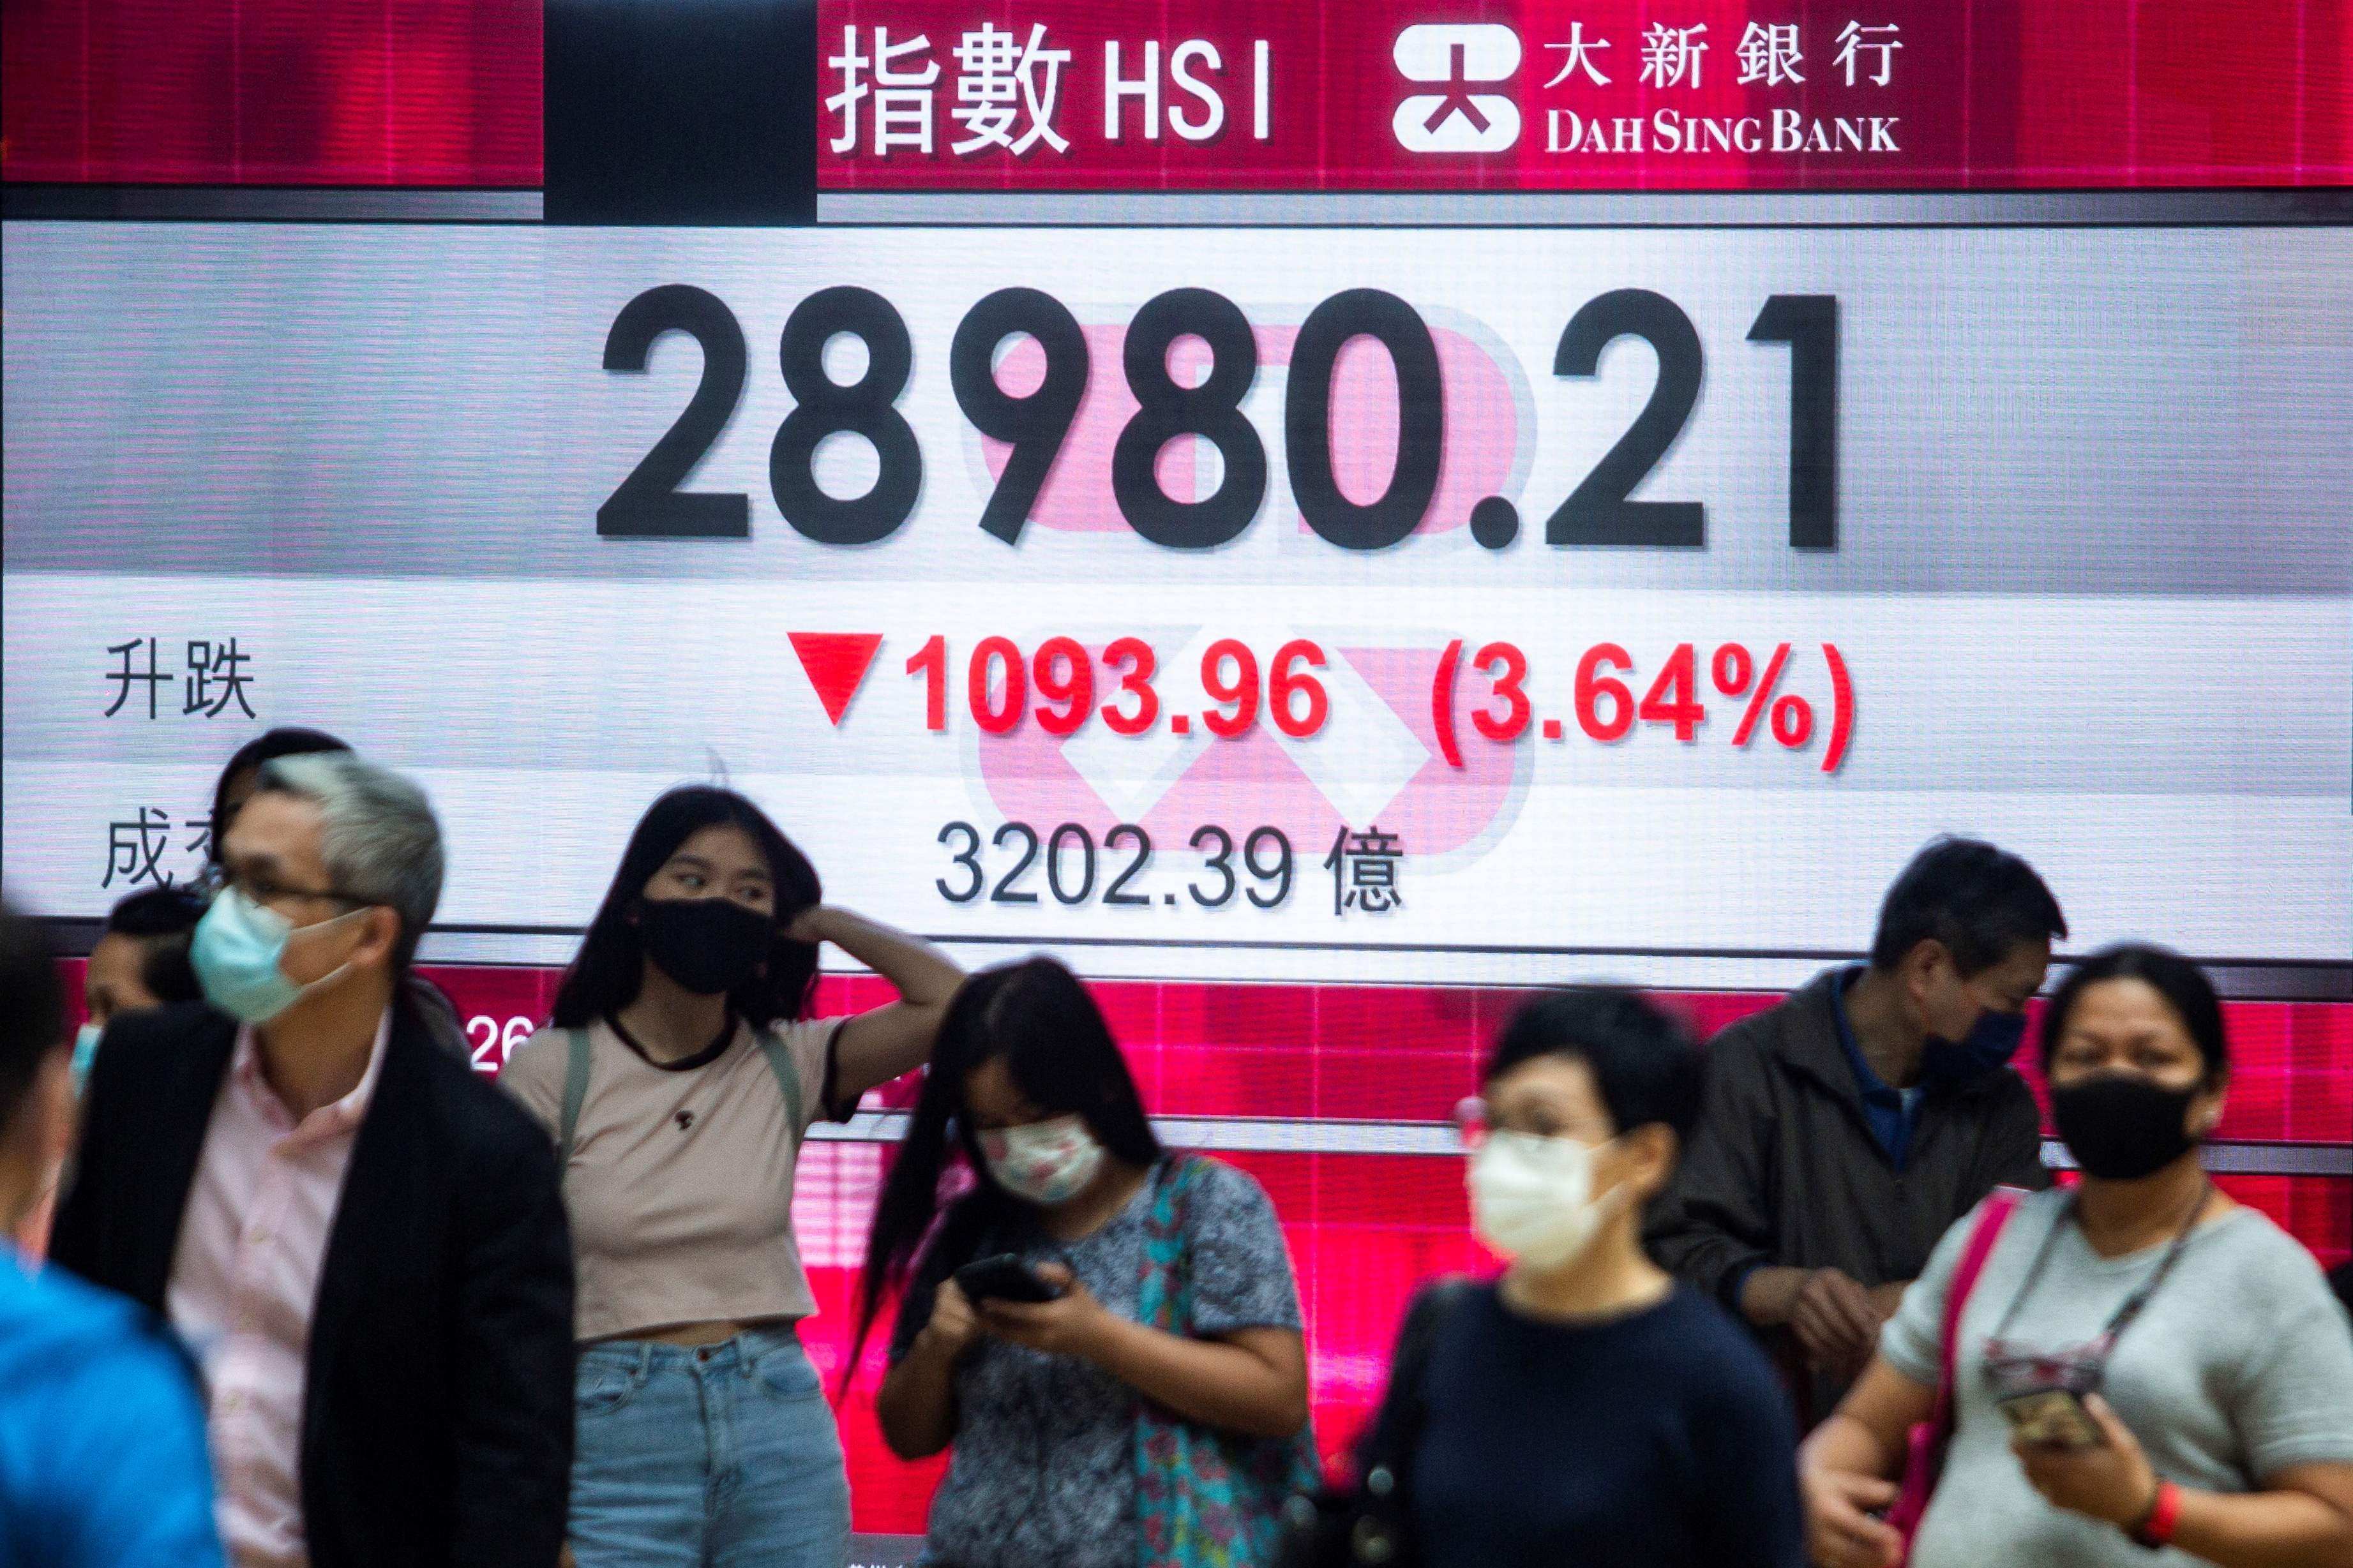 People walk past an electronic display showing the Hang Seng Index in Hong Kong’s Central district on February 26. Photo: AFP